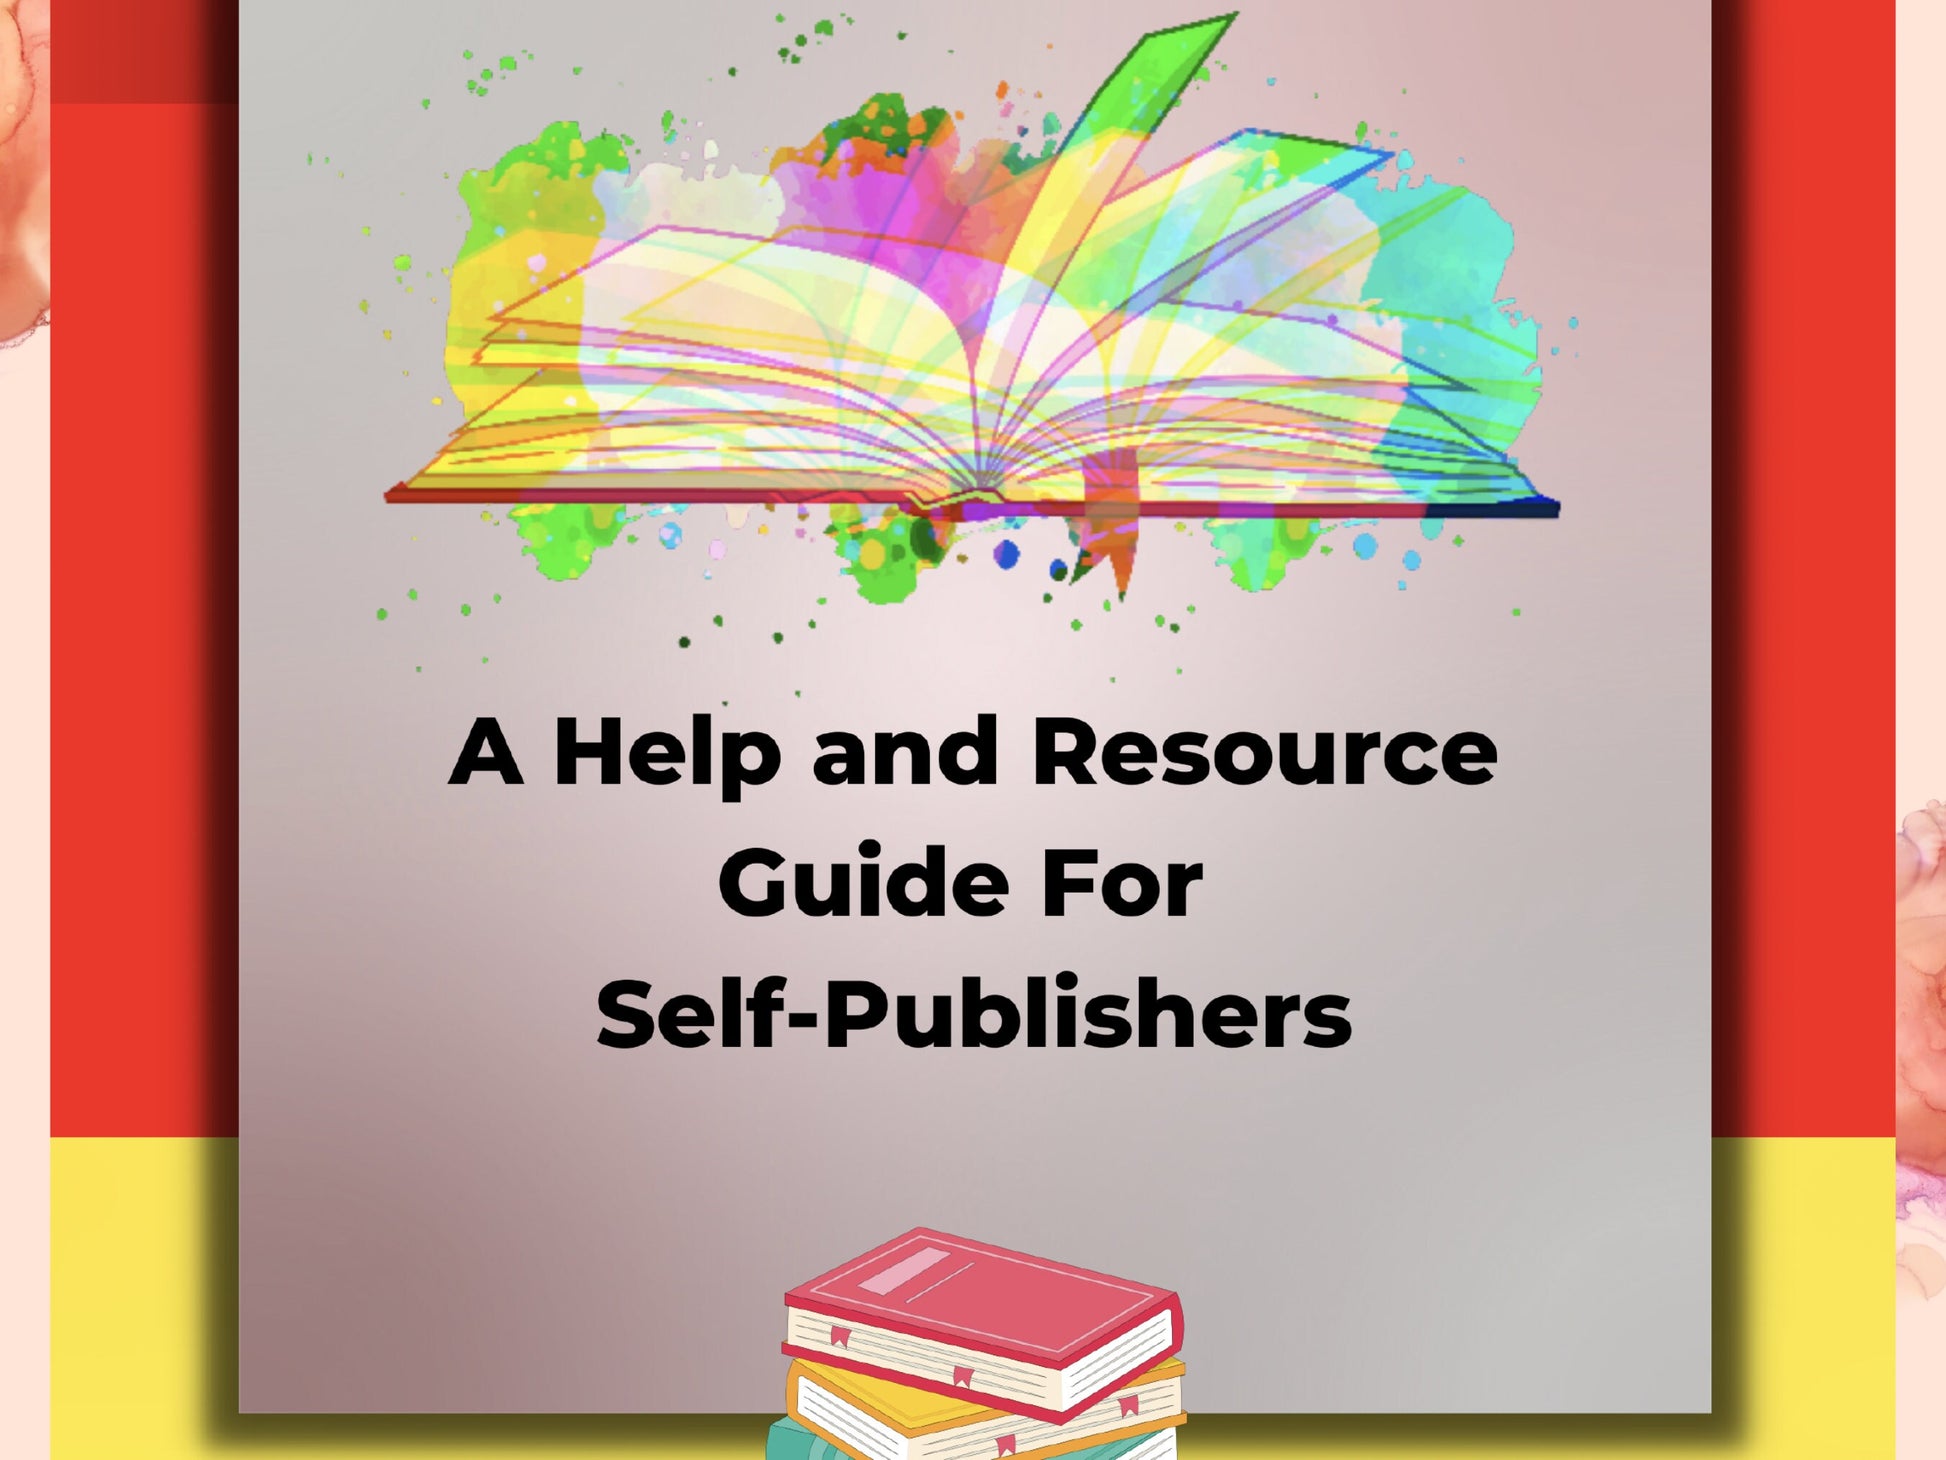 Self-Publish Your Book - What You Need To Know - Downloadable How To Guide For Self-Publishers by Wambui Bahati